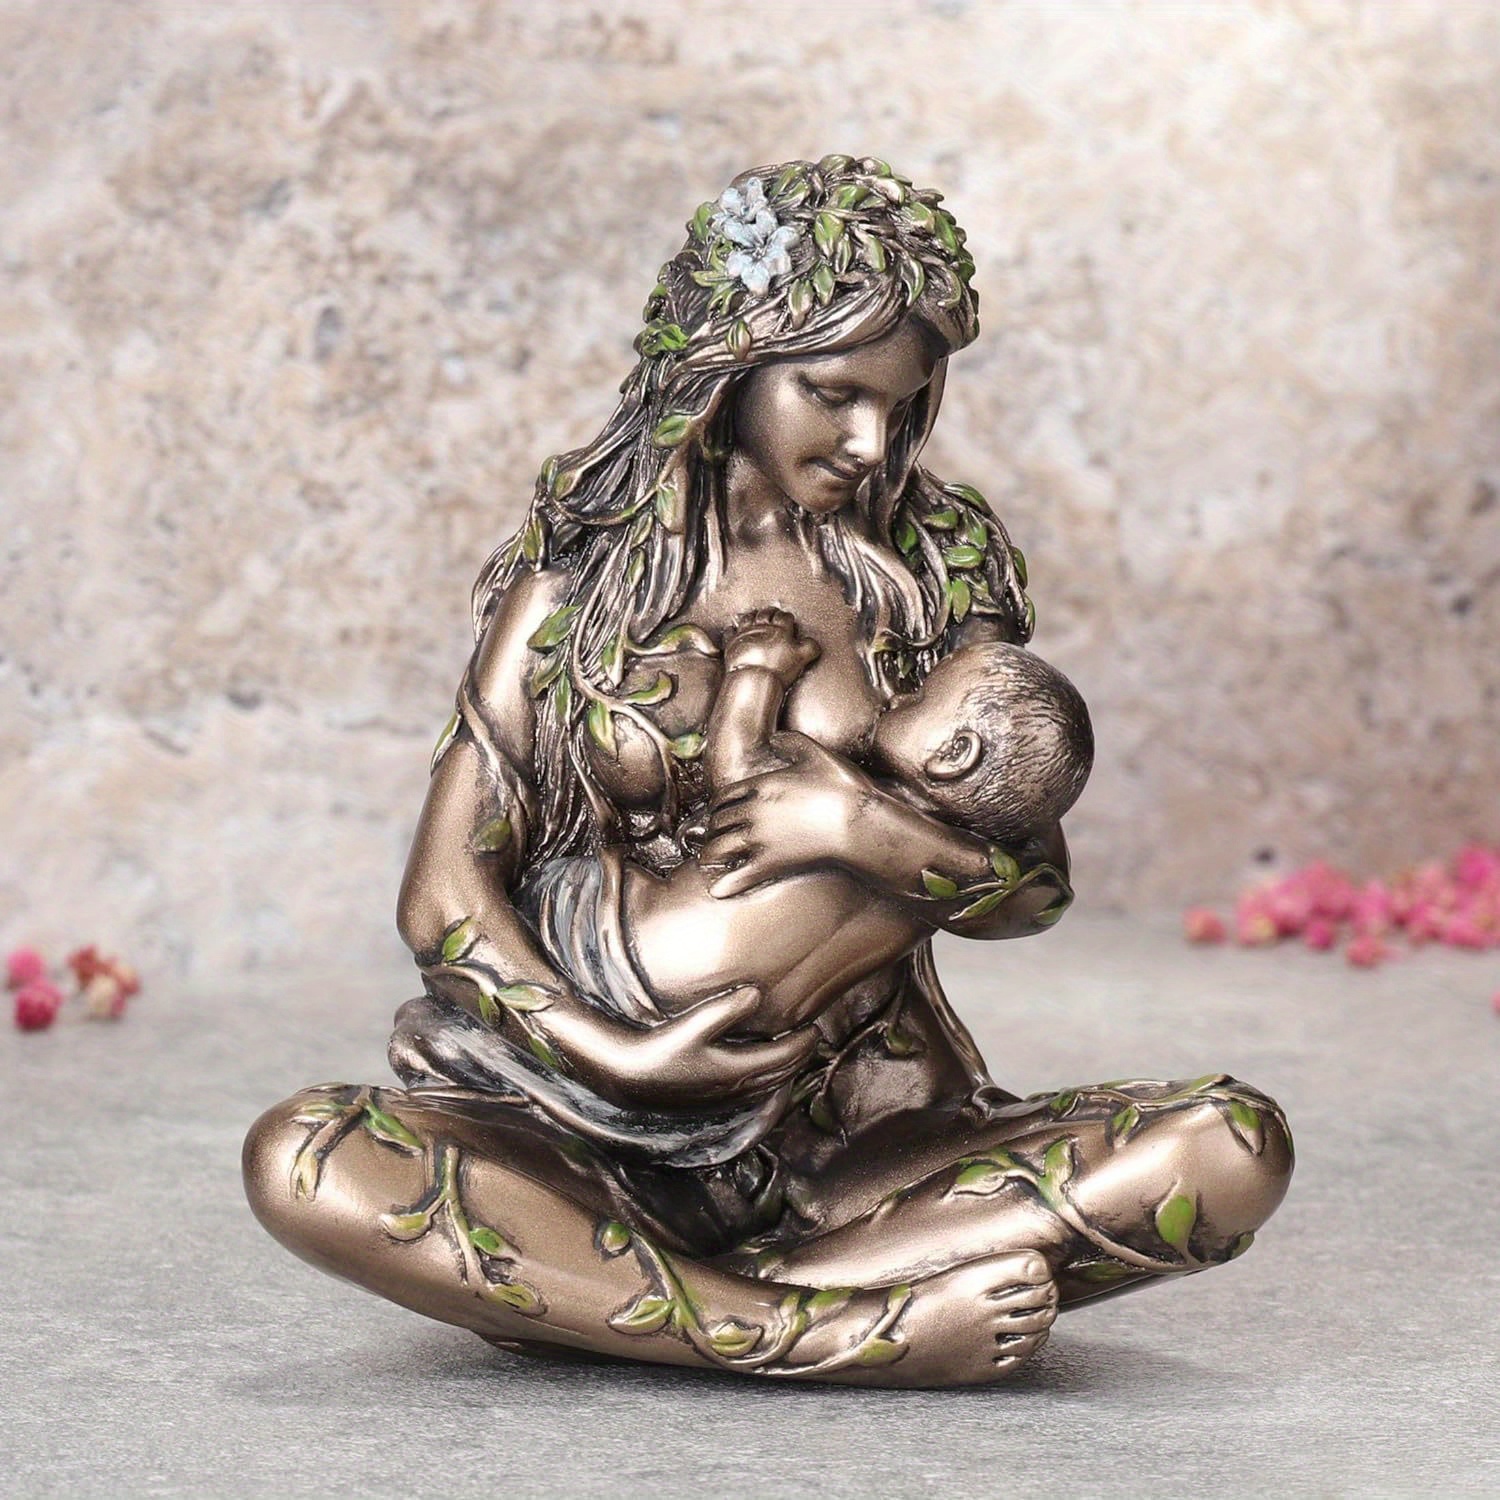 

Rustic Mother Earth Gaia Statue - Resin Nurturing Baby Figurine, Floor Mount, Figures/people Theme For Mother's Day, Use Without Electricity, No Battery Required (1pcs)